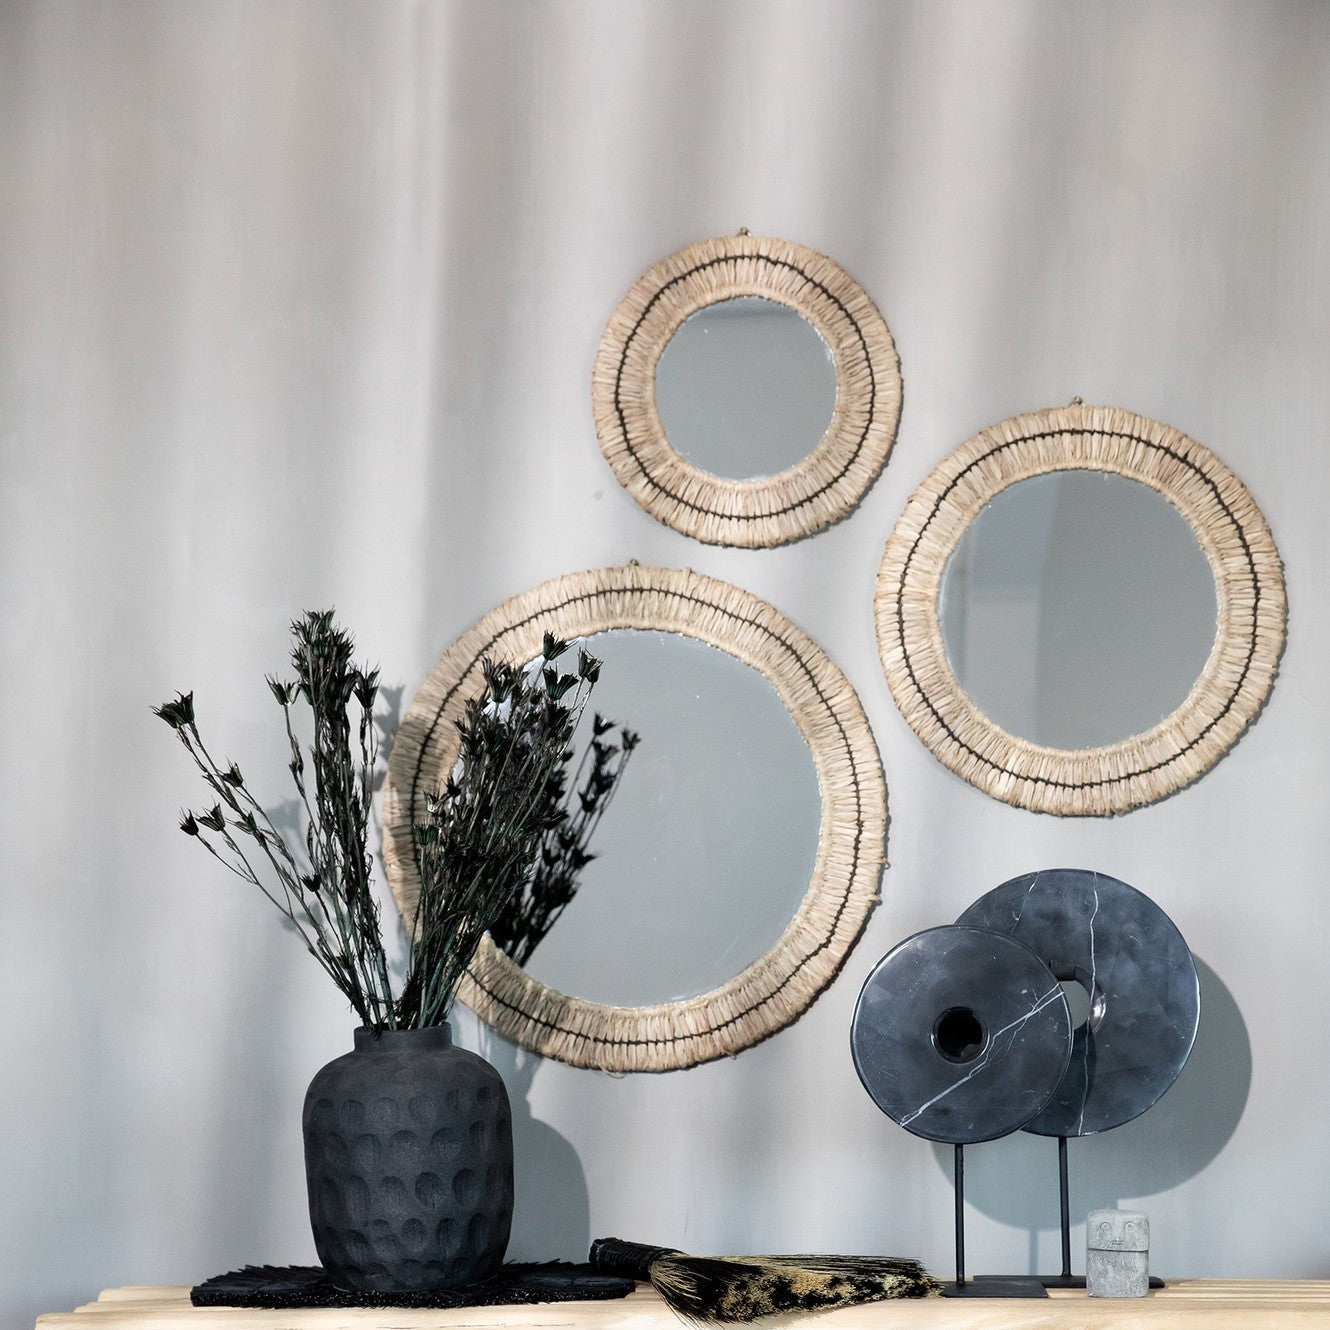 THE MARBLE DISC On Stand-Black-Medium front interior view with mirrors and vase black